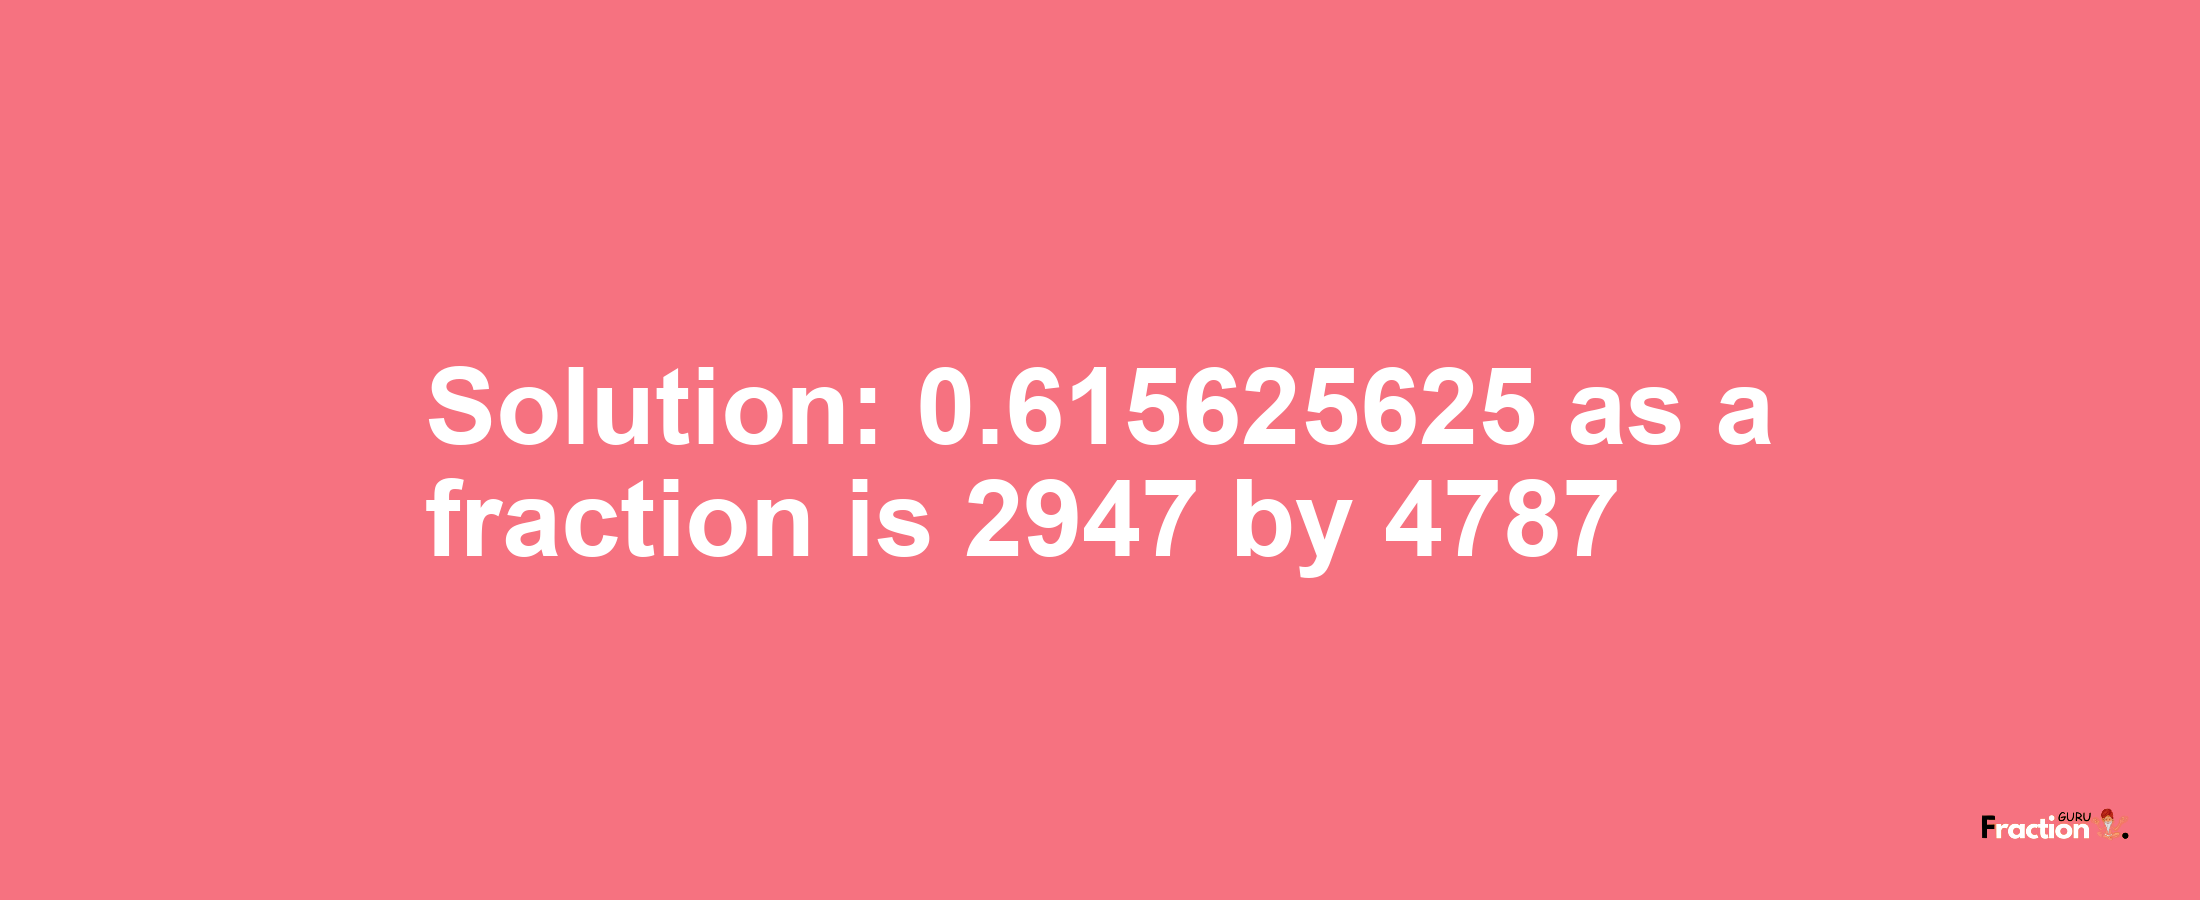 Solution:0.615625625 as a fraction is 2947/4787